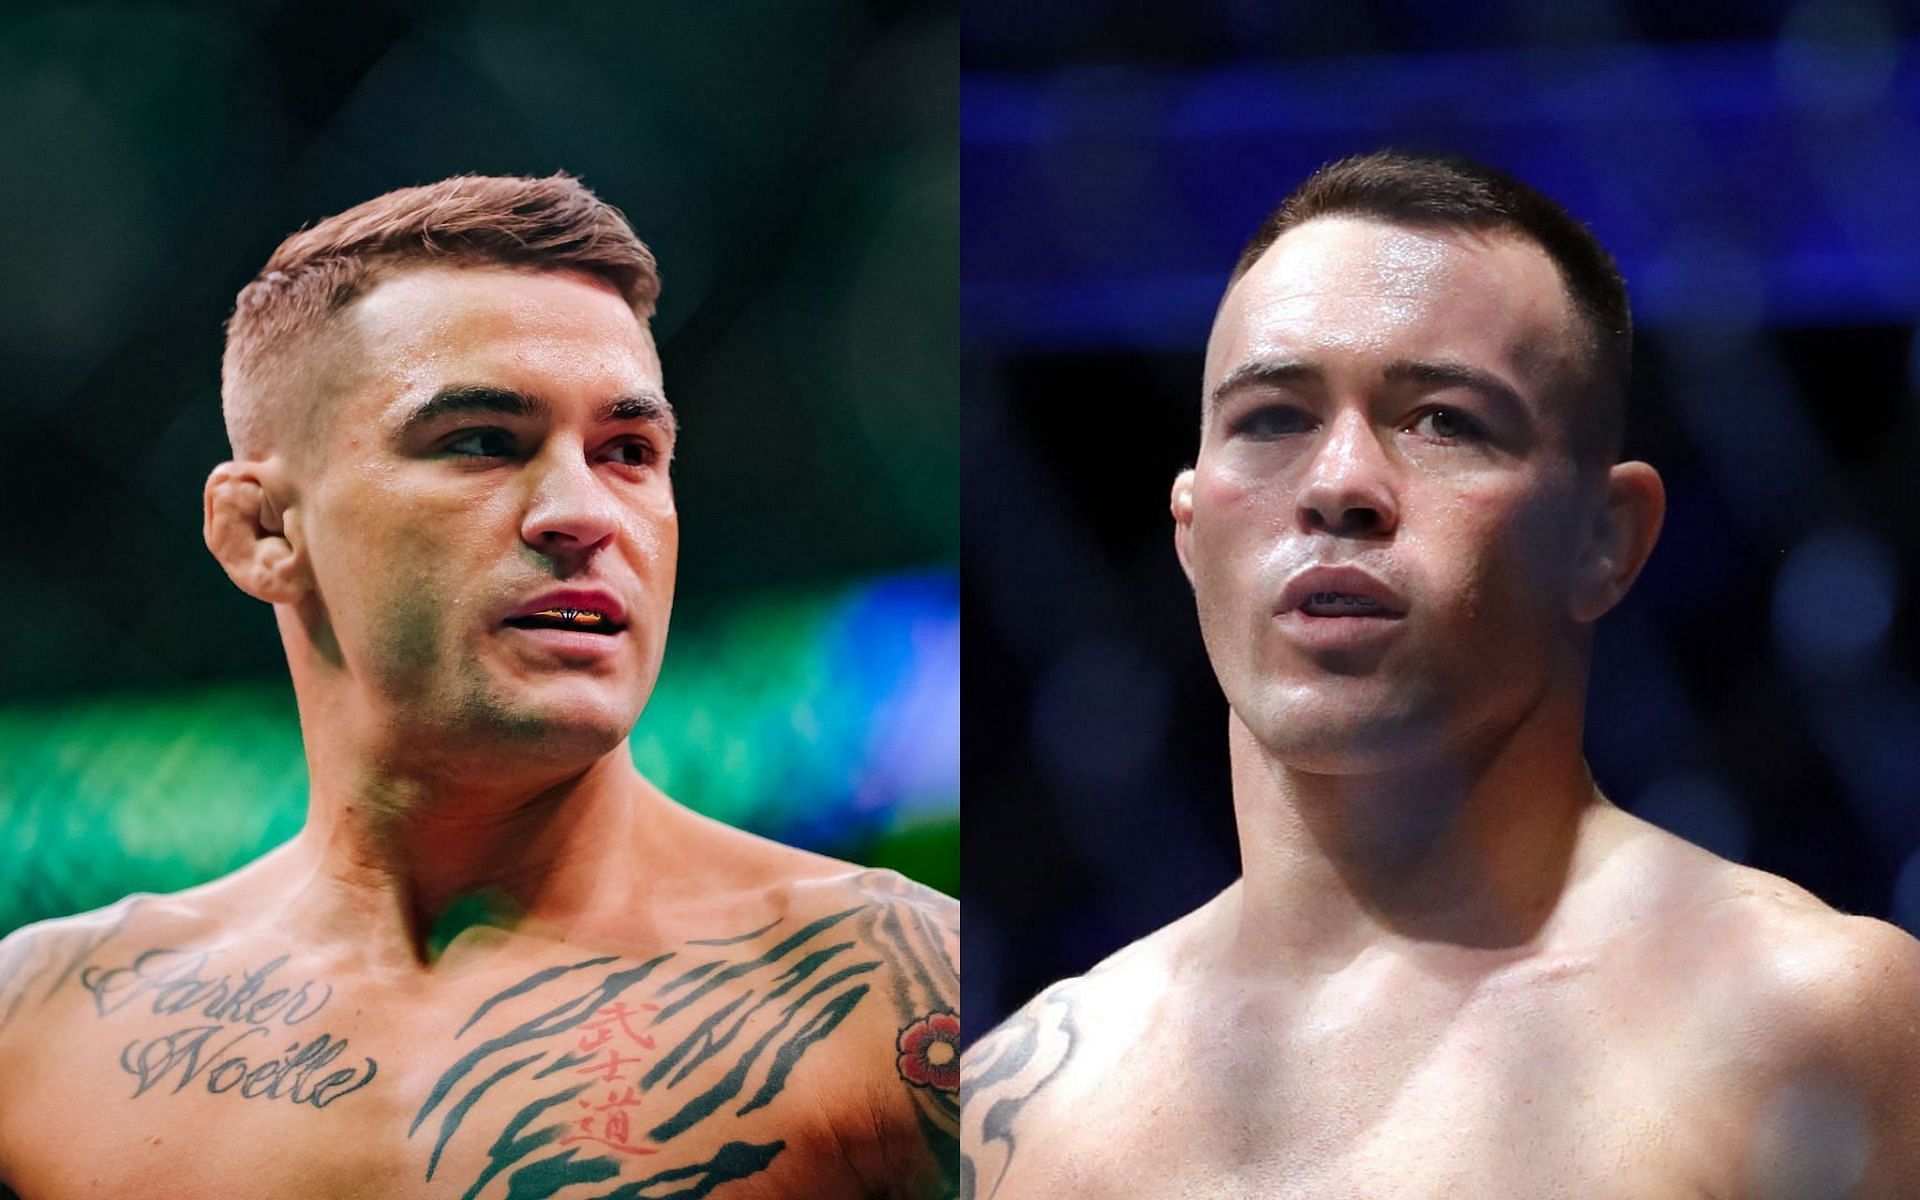 Colby Covington laid into Dustin Poirier with a shocking series of insults during a recent interview